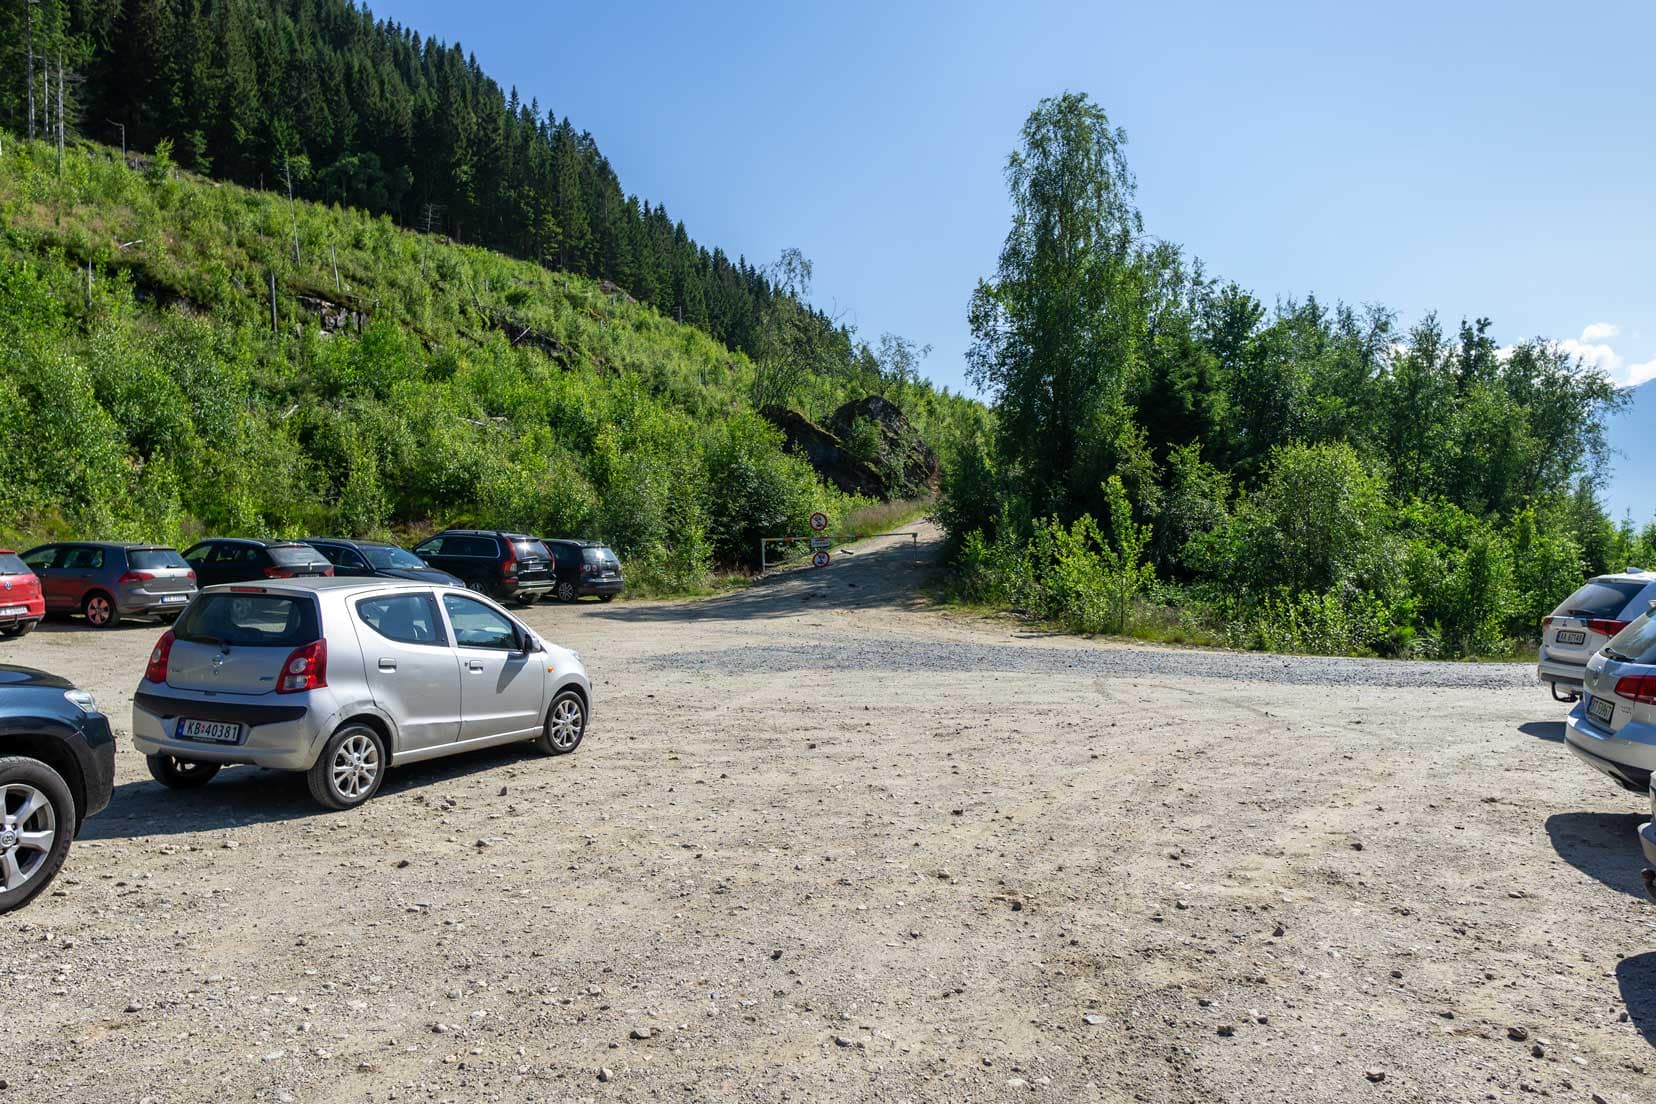 Rote carpark, start of Dronningstien hike